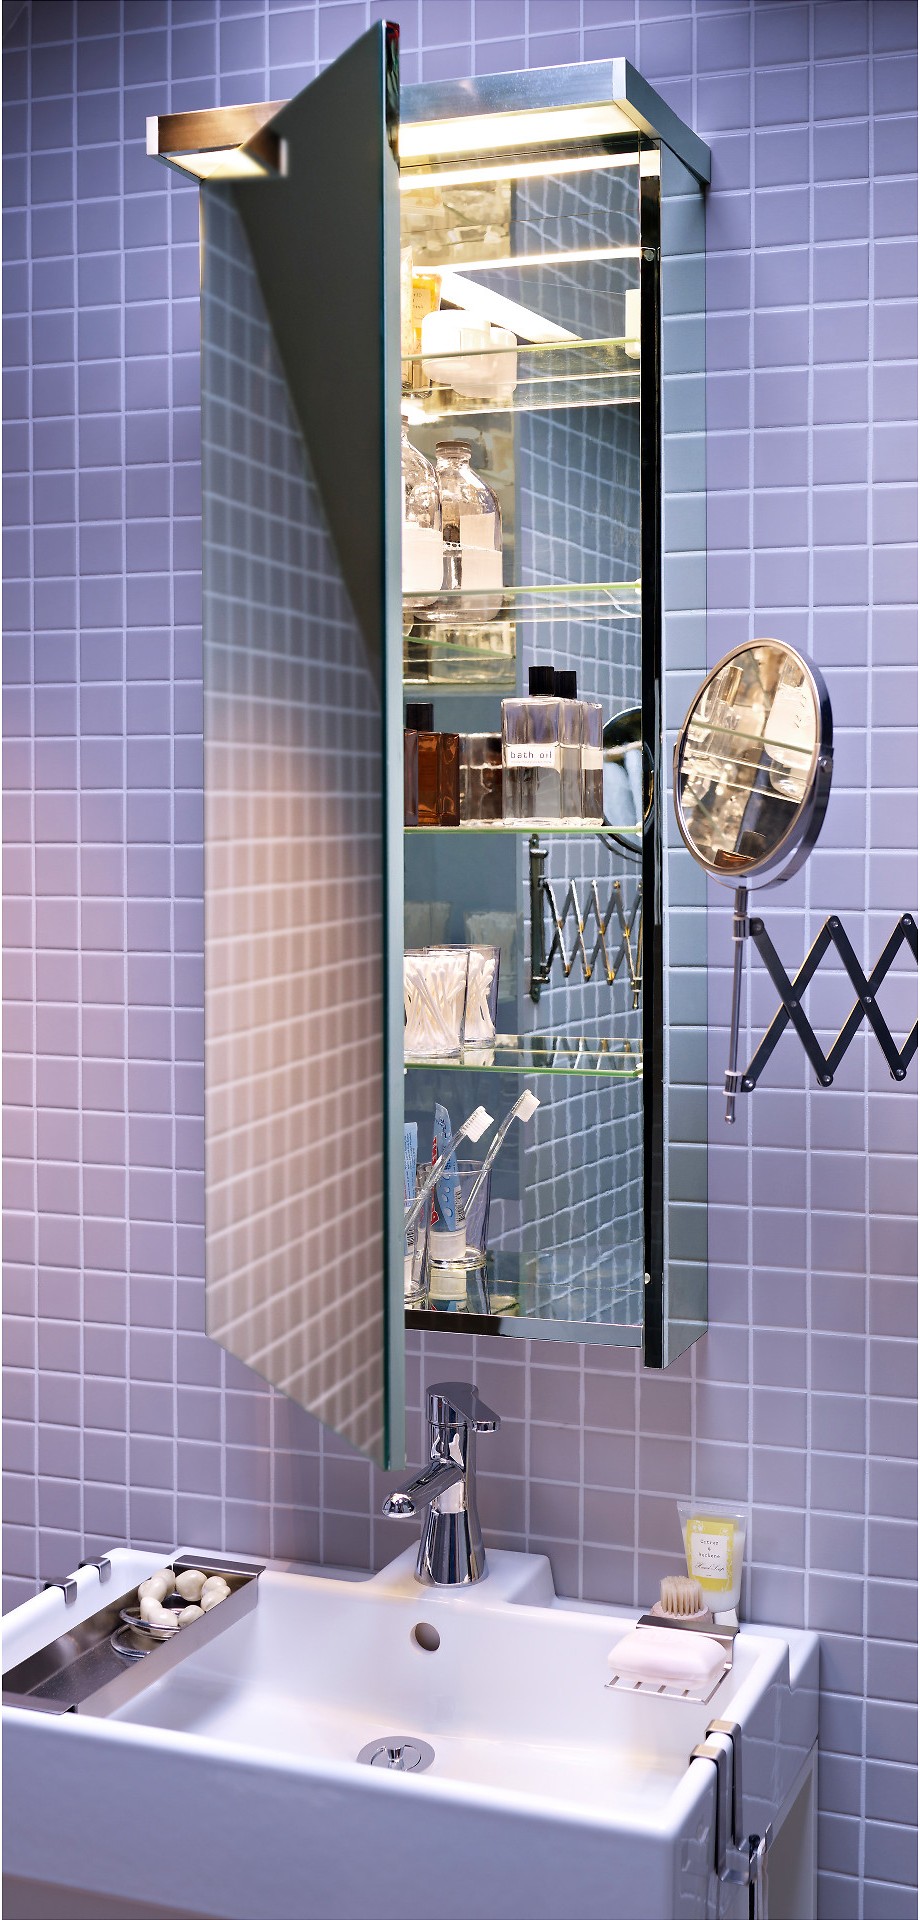 An IKEA GODMORGON, which is a big storage cabinet with four adjustable shelves and a dual-side mirror, is mounted to a tiled bathroom wall.